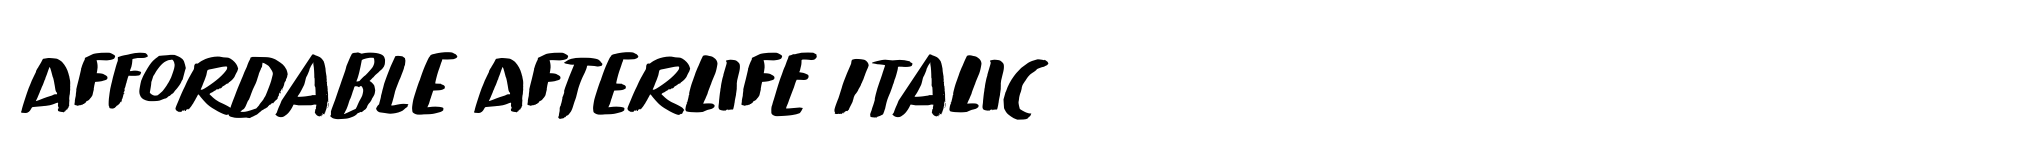 Affordable Afterlife Italic image